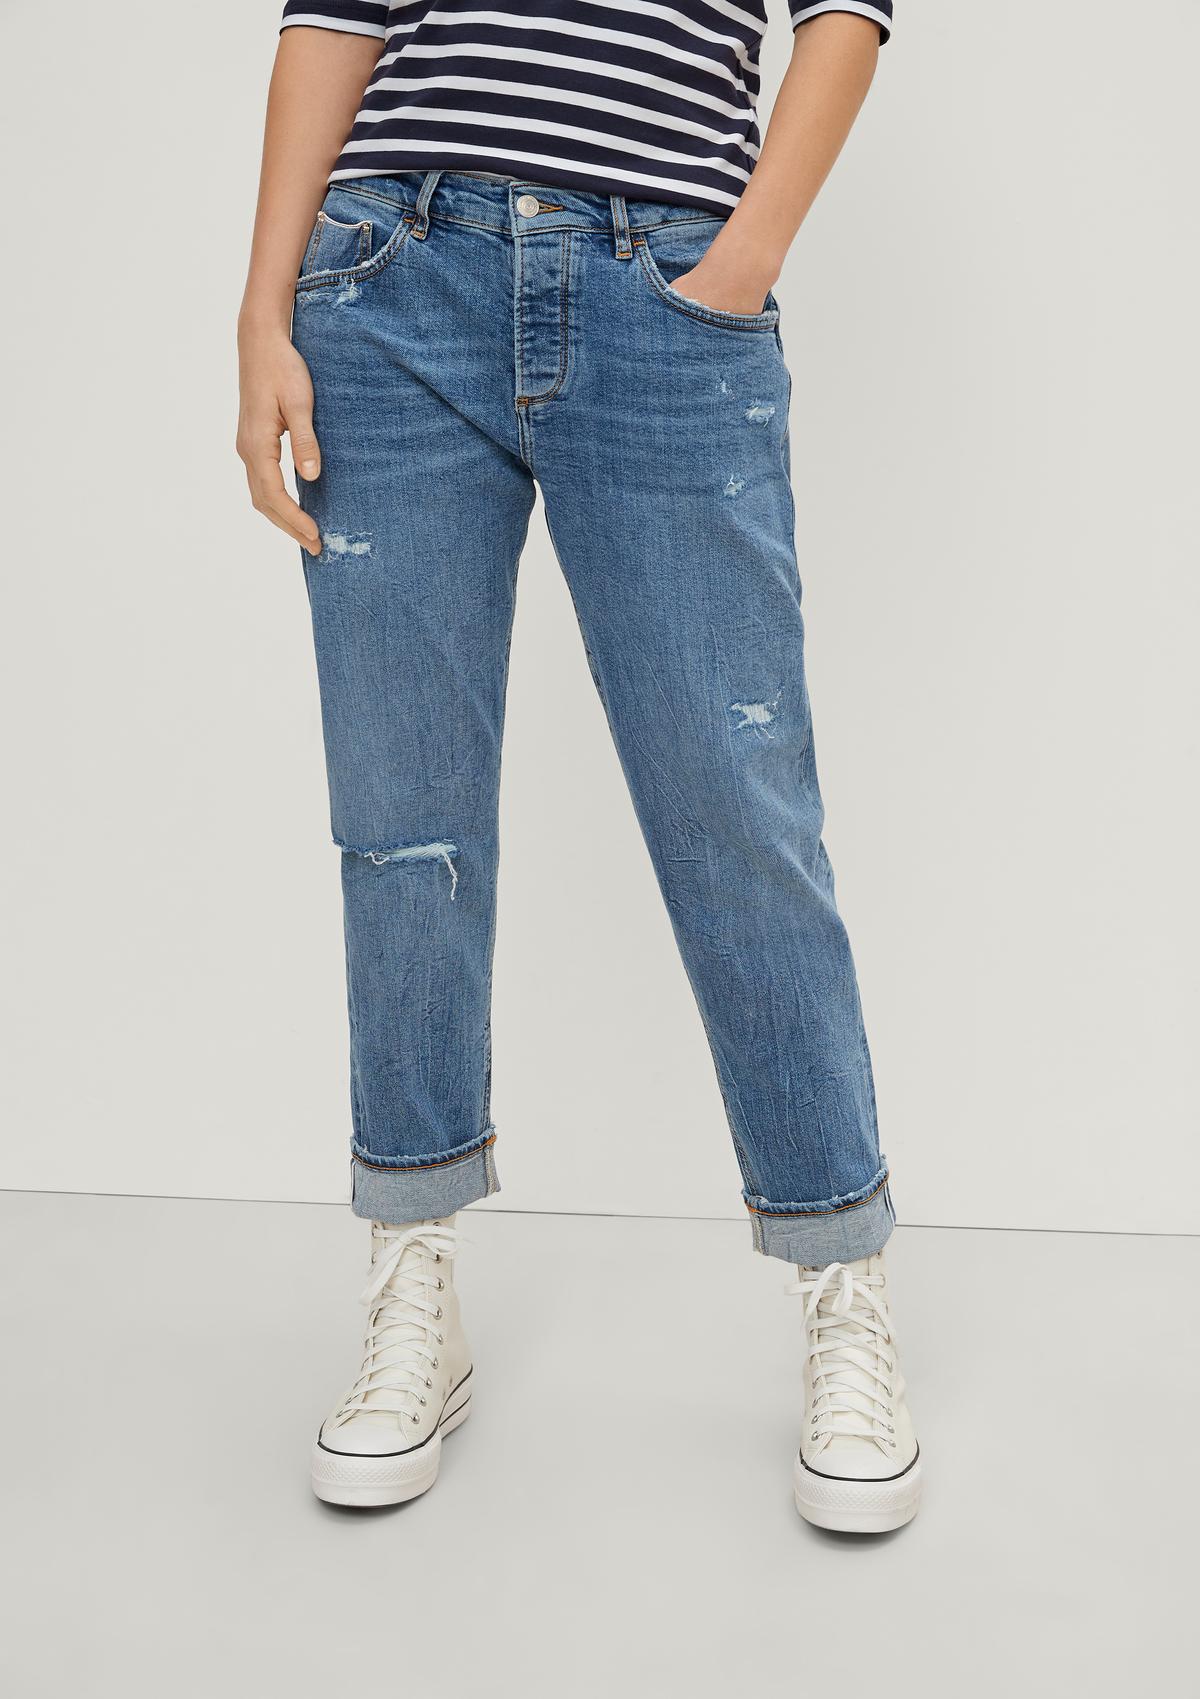 Regular: Jeans with distressed details